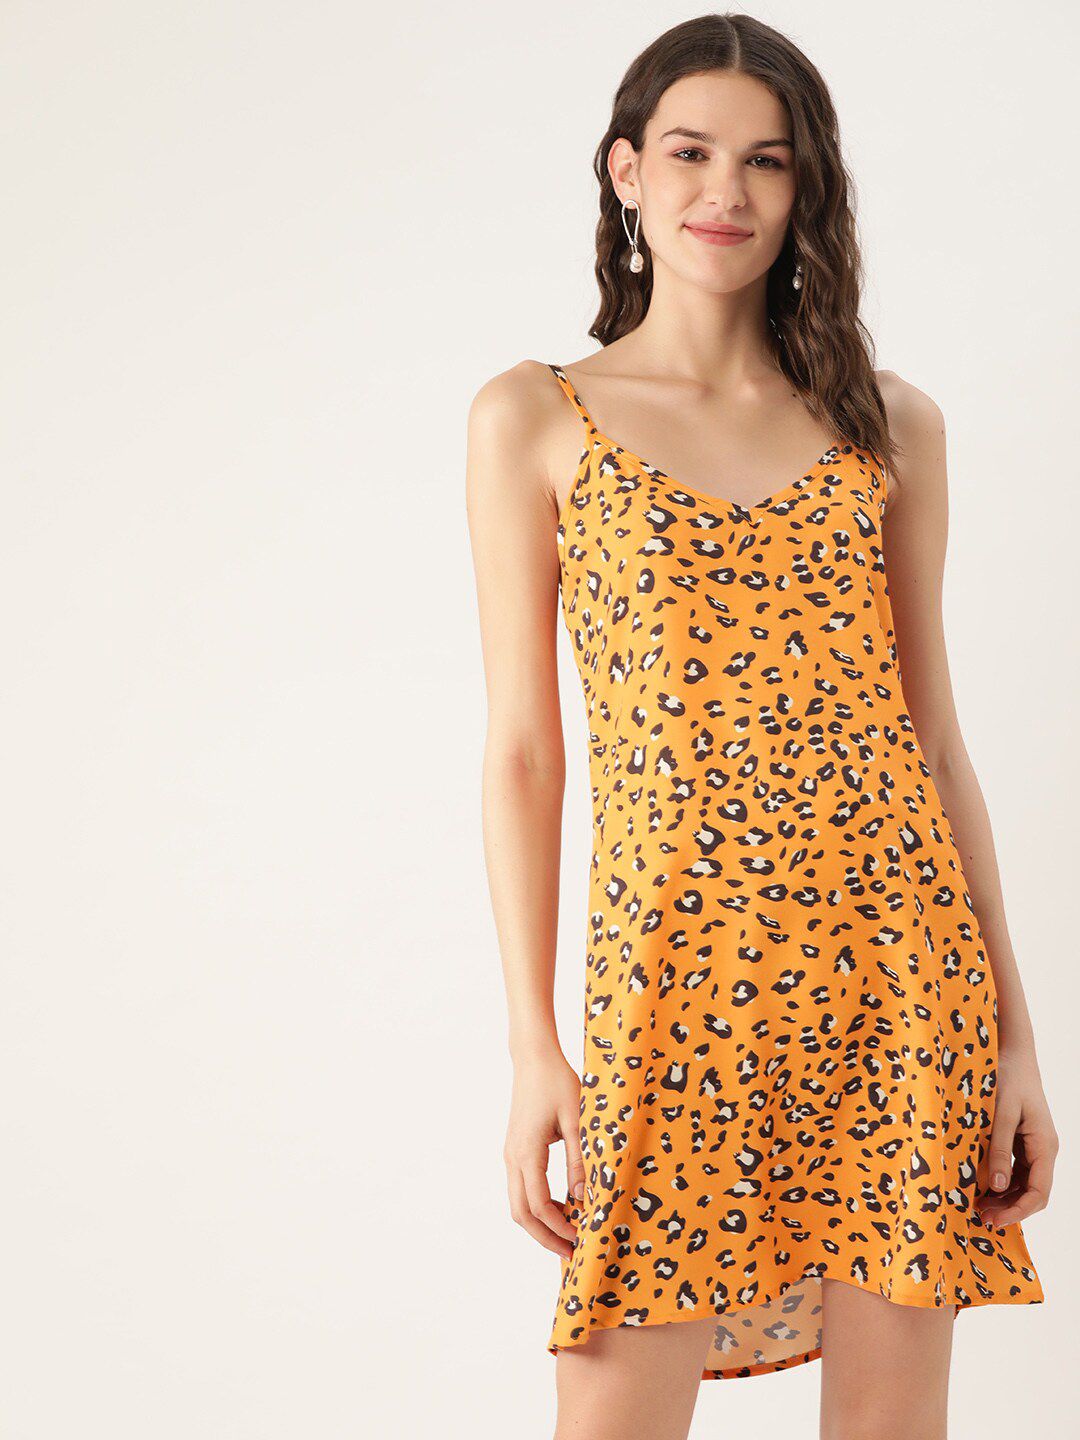 DressBerry Yellow Animal Printed Shoulder Straps Mini A-Line Dress Price in India